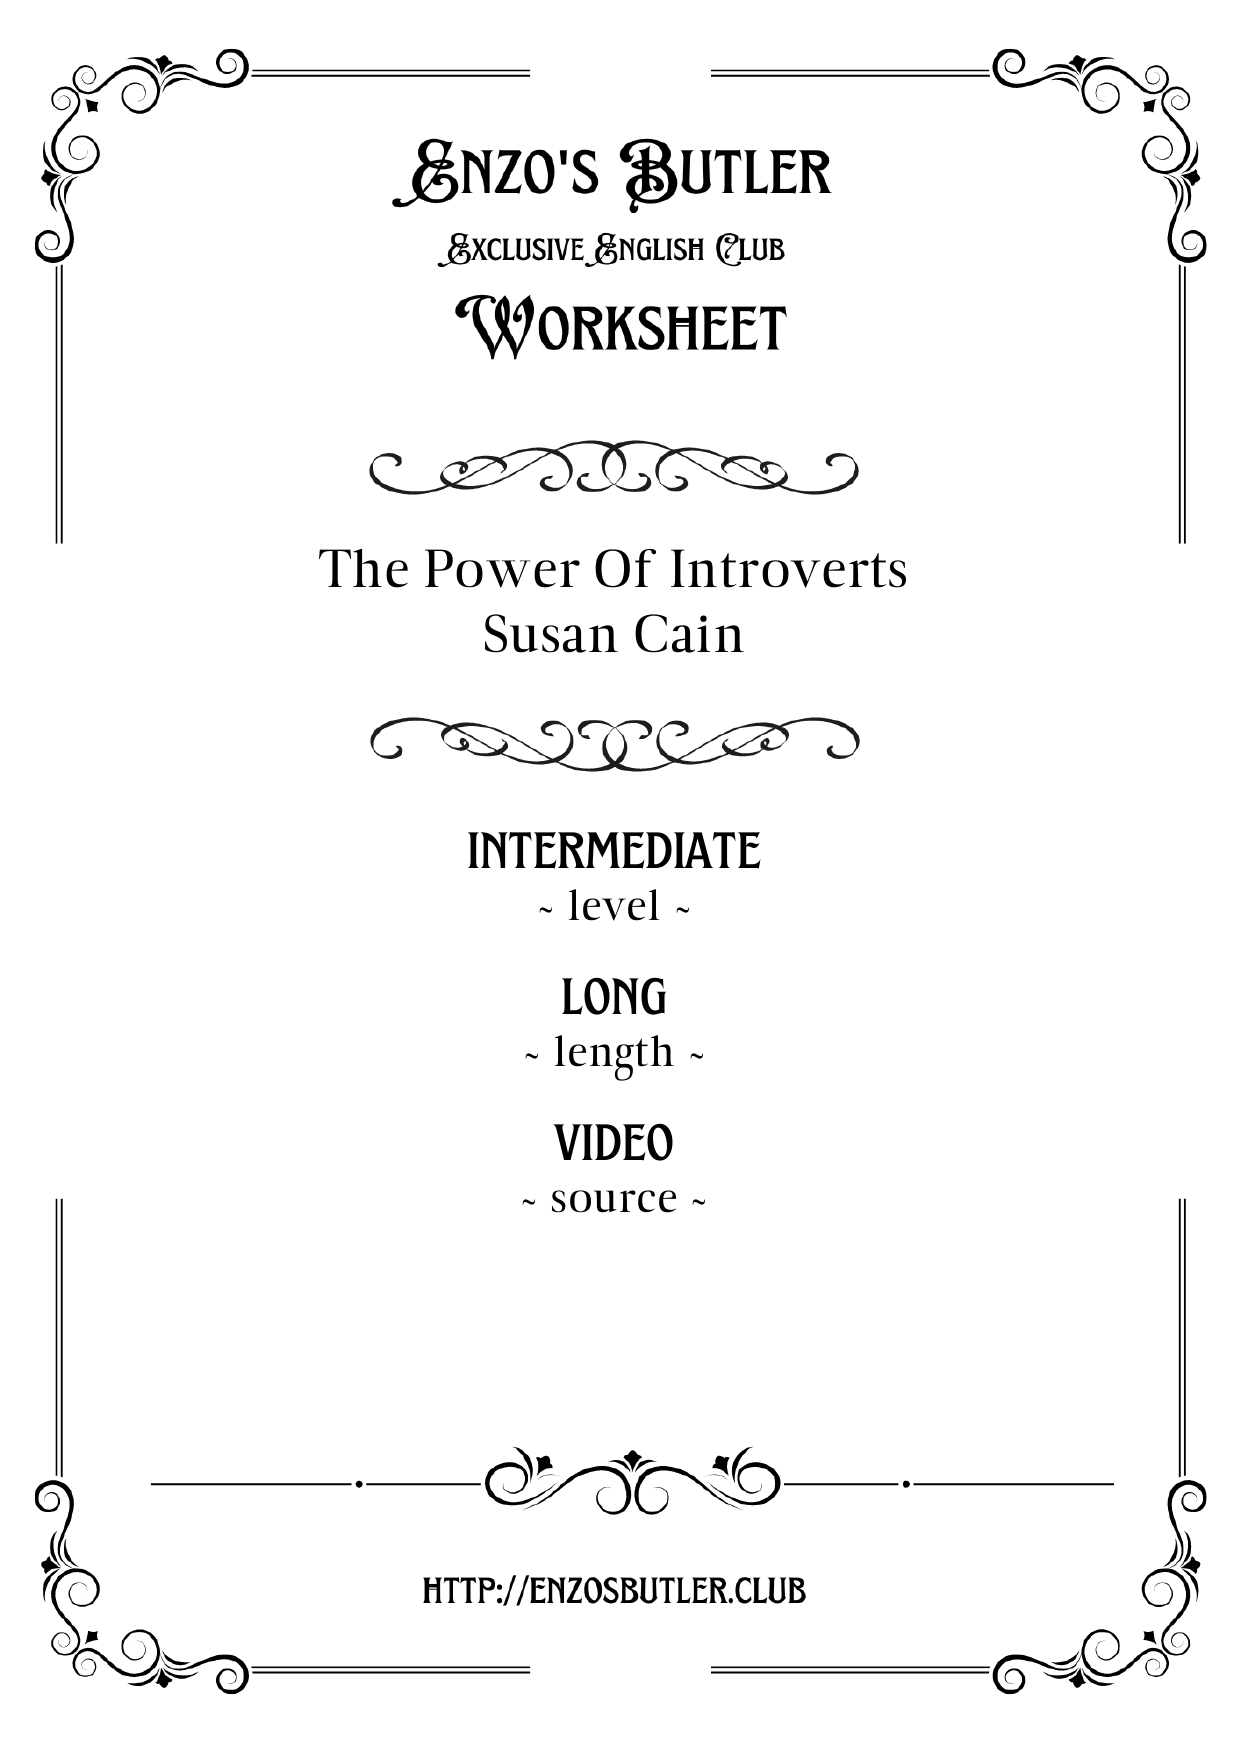 The power of introverts by Susan Cain ~ English Worksheet